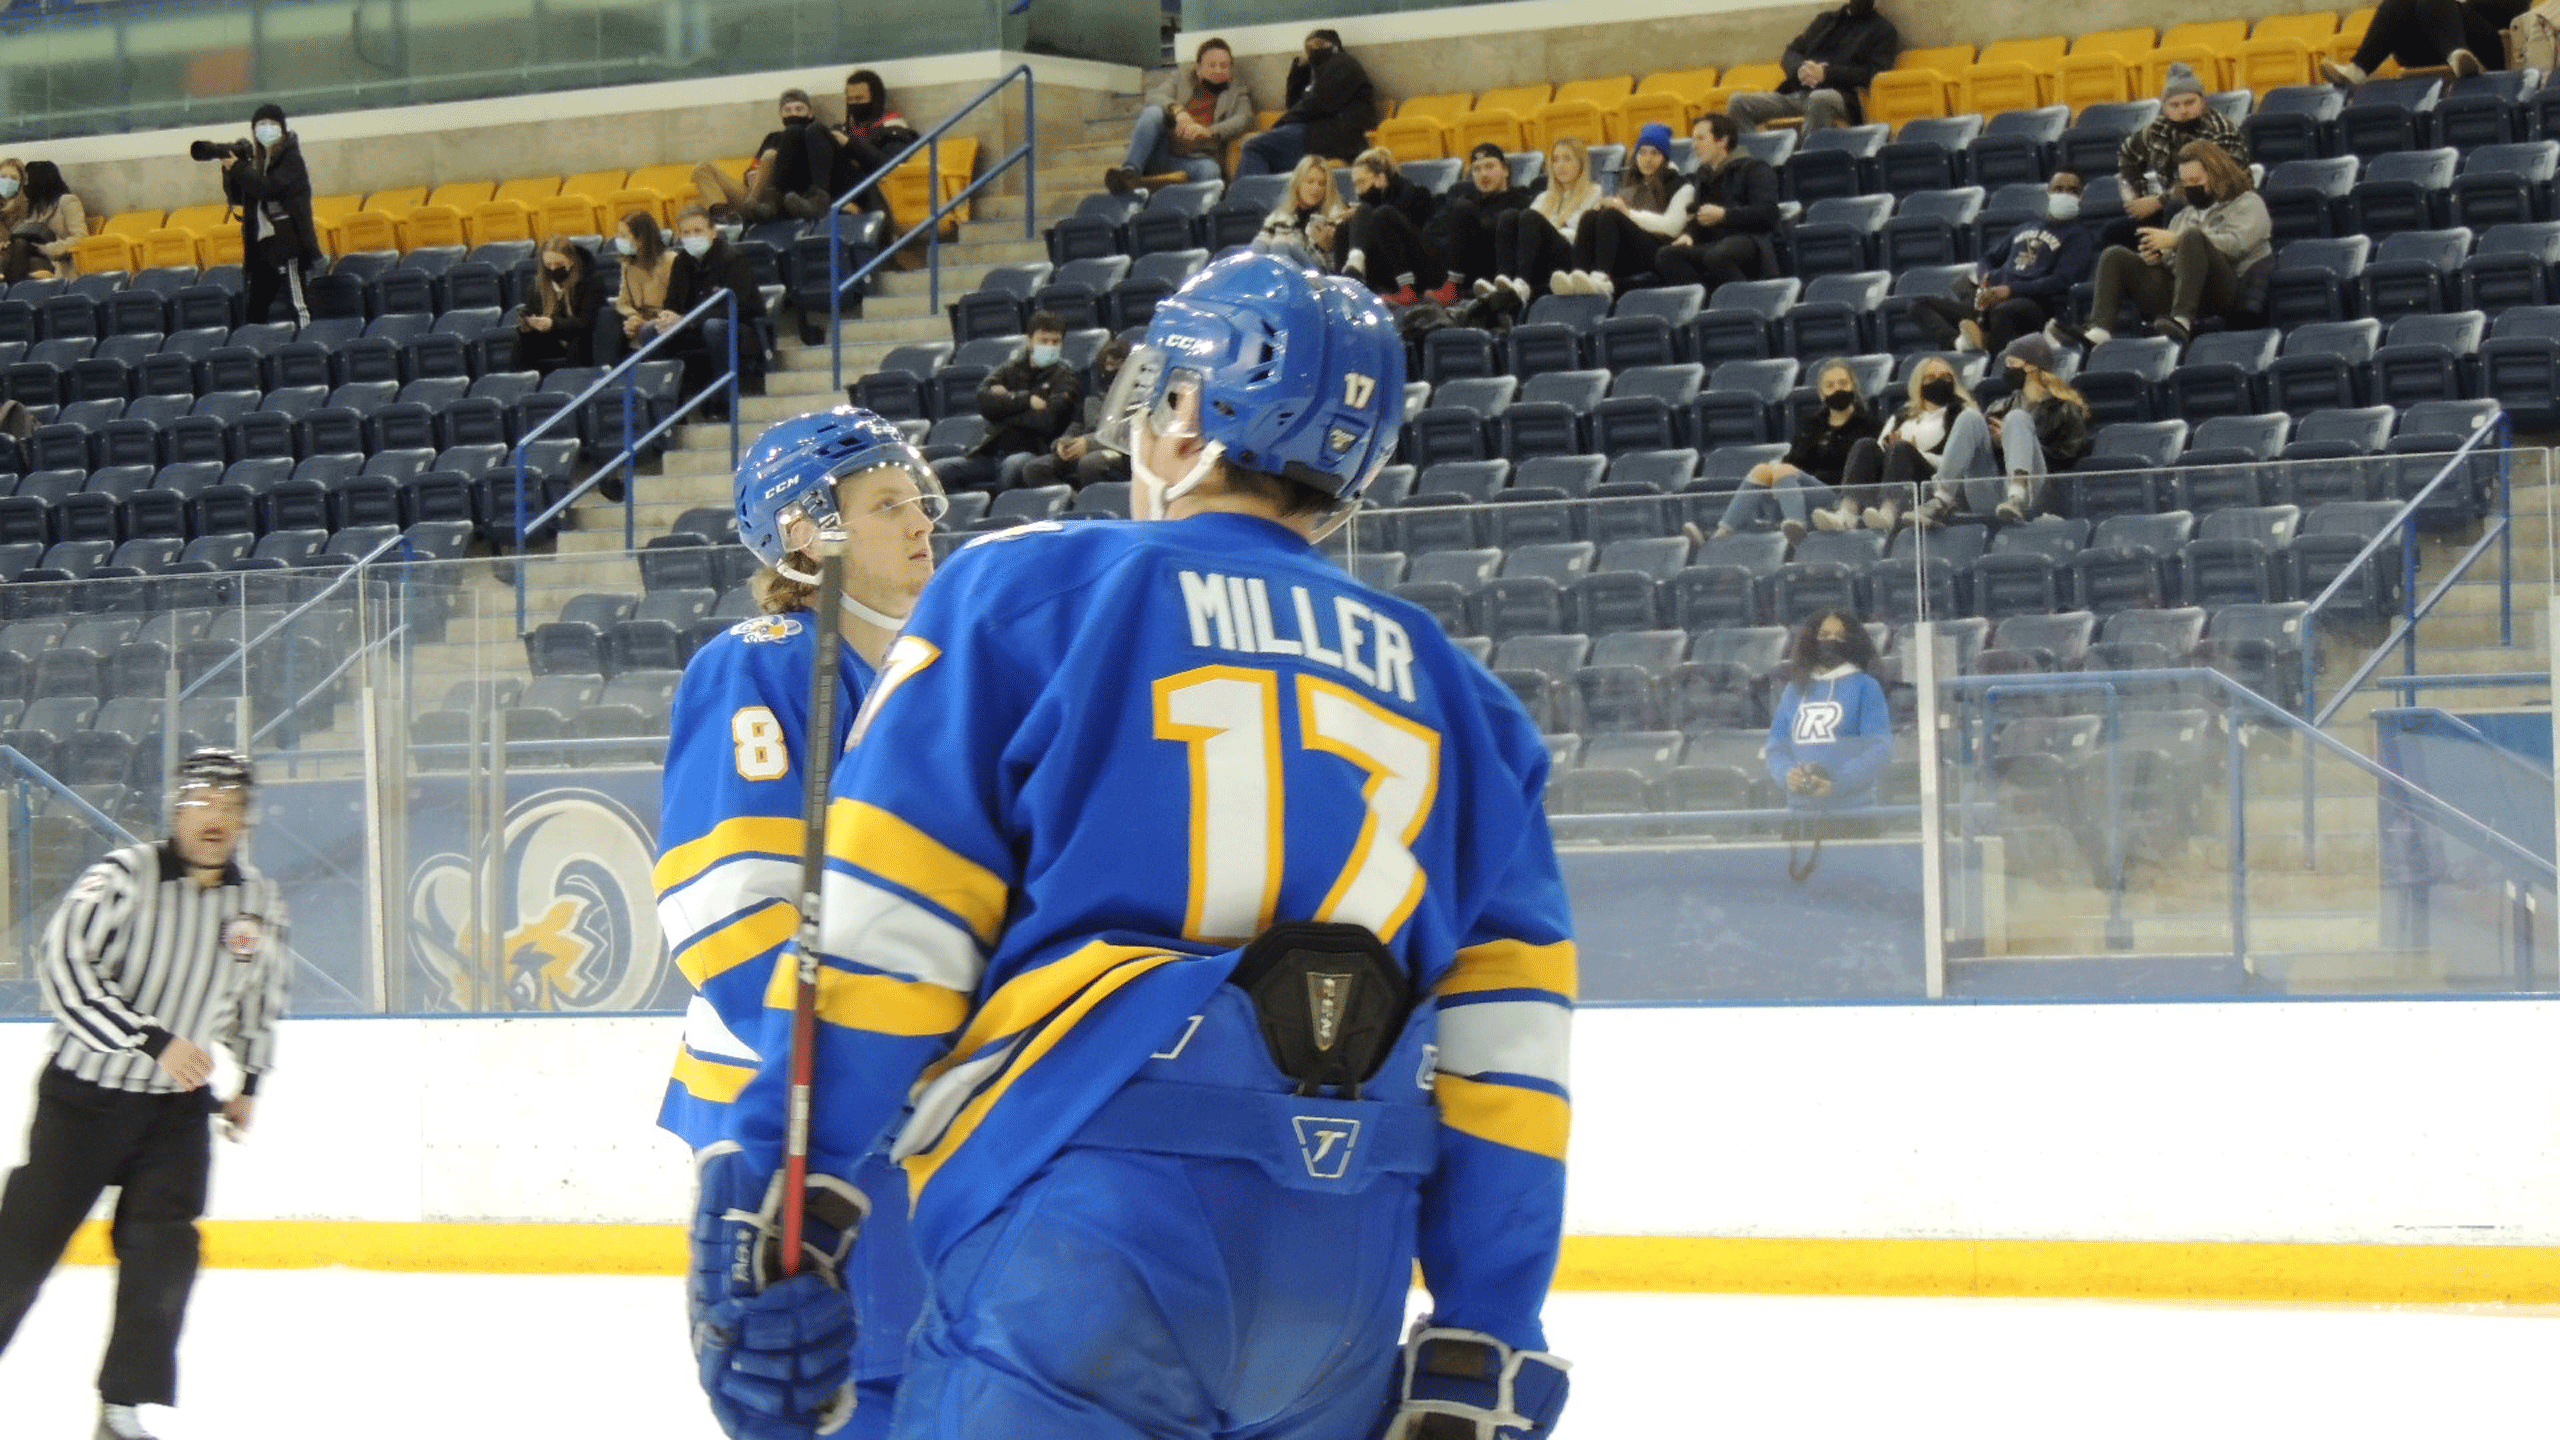 A Rams men's hockey player with the jersey number 17 skates down the ice